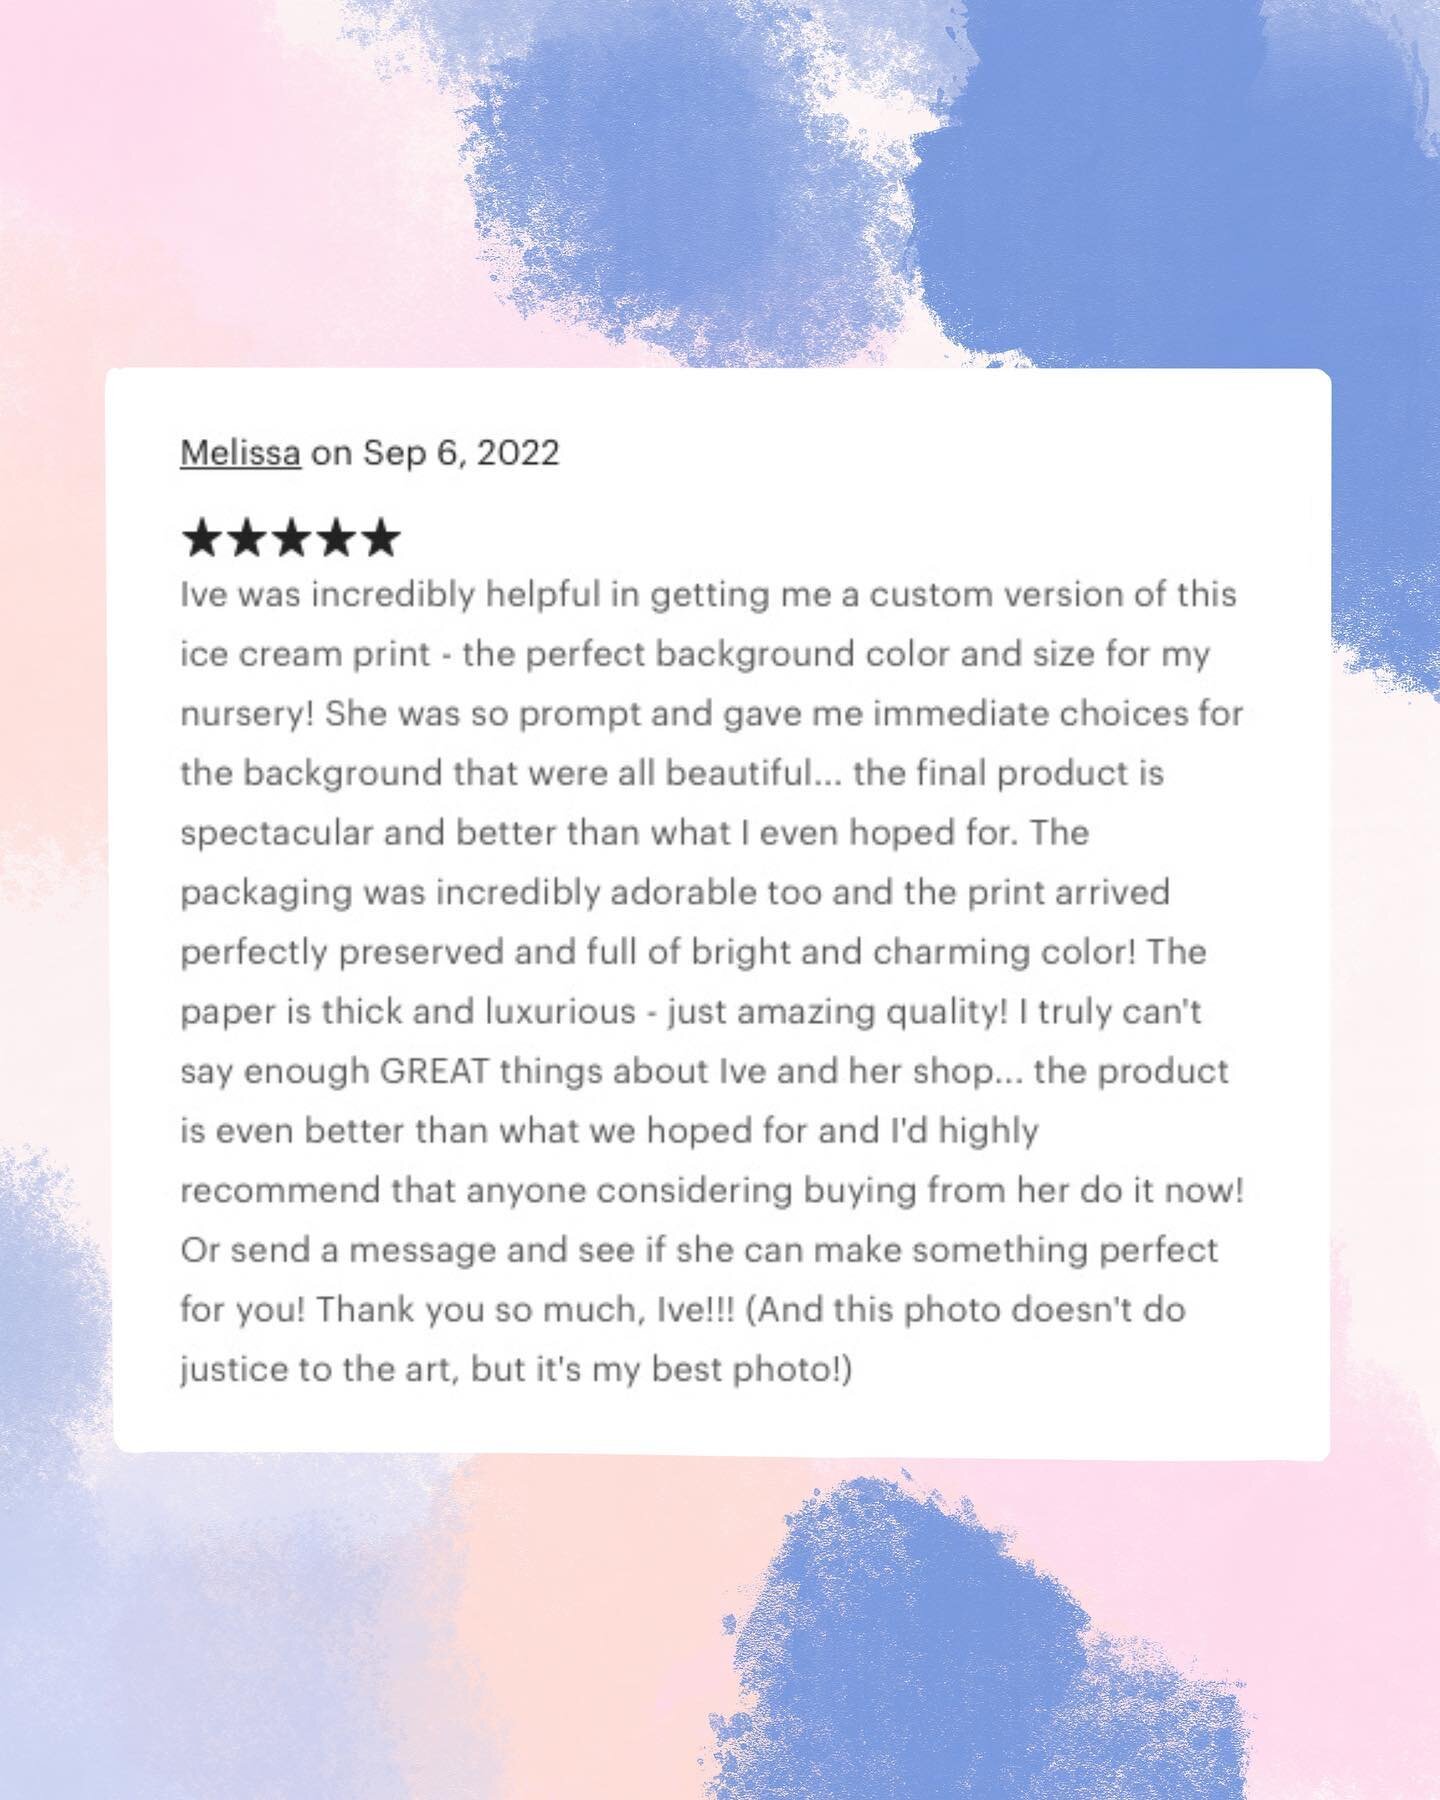 I've had a very weird day today. I'm late with doing my content planning and despite the fact that it's bank holiday in here, I was feeling guilty for taking the day off. I took an unplanned nap this afternoon and woke up to this review in my shop. M